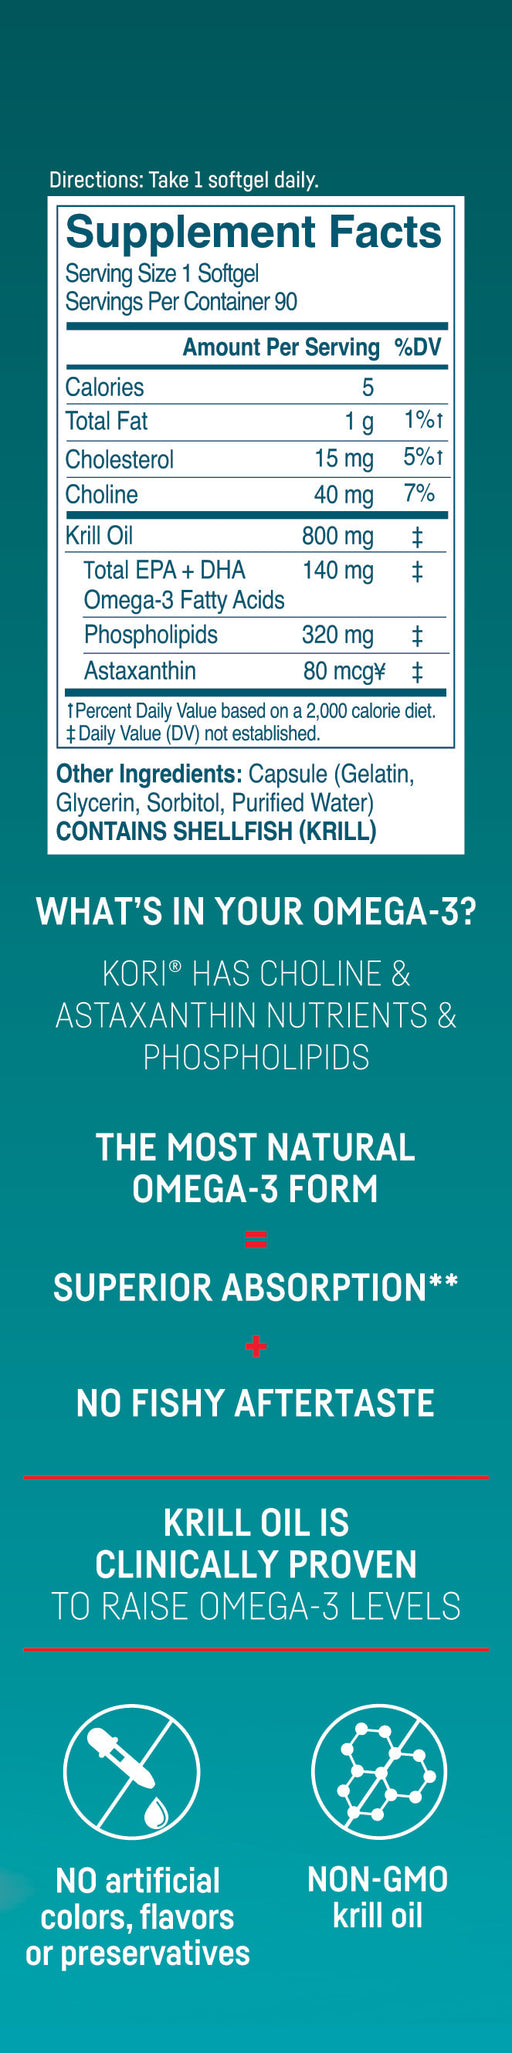 A blue and white poster with supplement nutrition facts on Kori Krill Oil softgels 800 mg 90 ct. 800mg of krill oil, that includes 140mg of fatty acids, 320mg of phospholipids, and 80mcg of astaxanthin. 5 calories. 1g of fat. 15mg of cholesterol. 40mg of choline. Serving size 1 softgel. 90 servings per a container. Other ingredients include gelatin, glycerin, sorbitol, and purified water for the capsule. Contains shellfish.